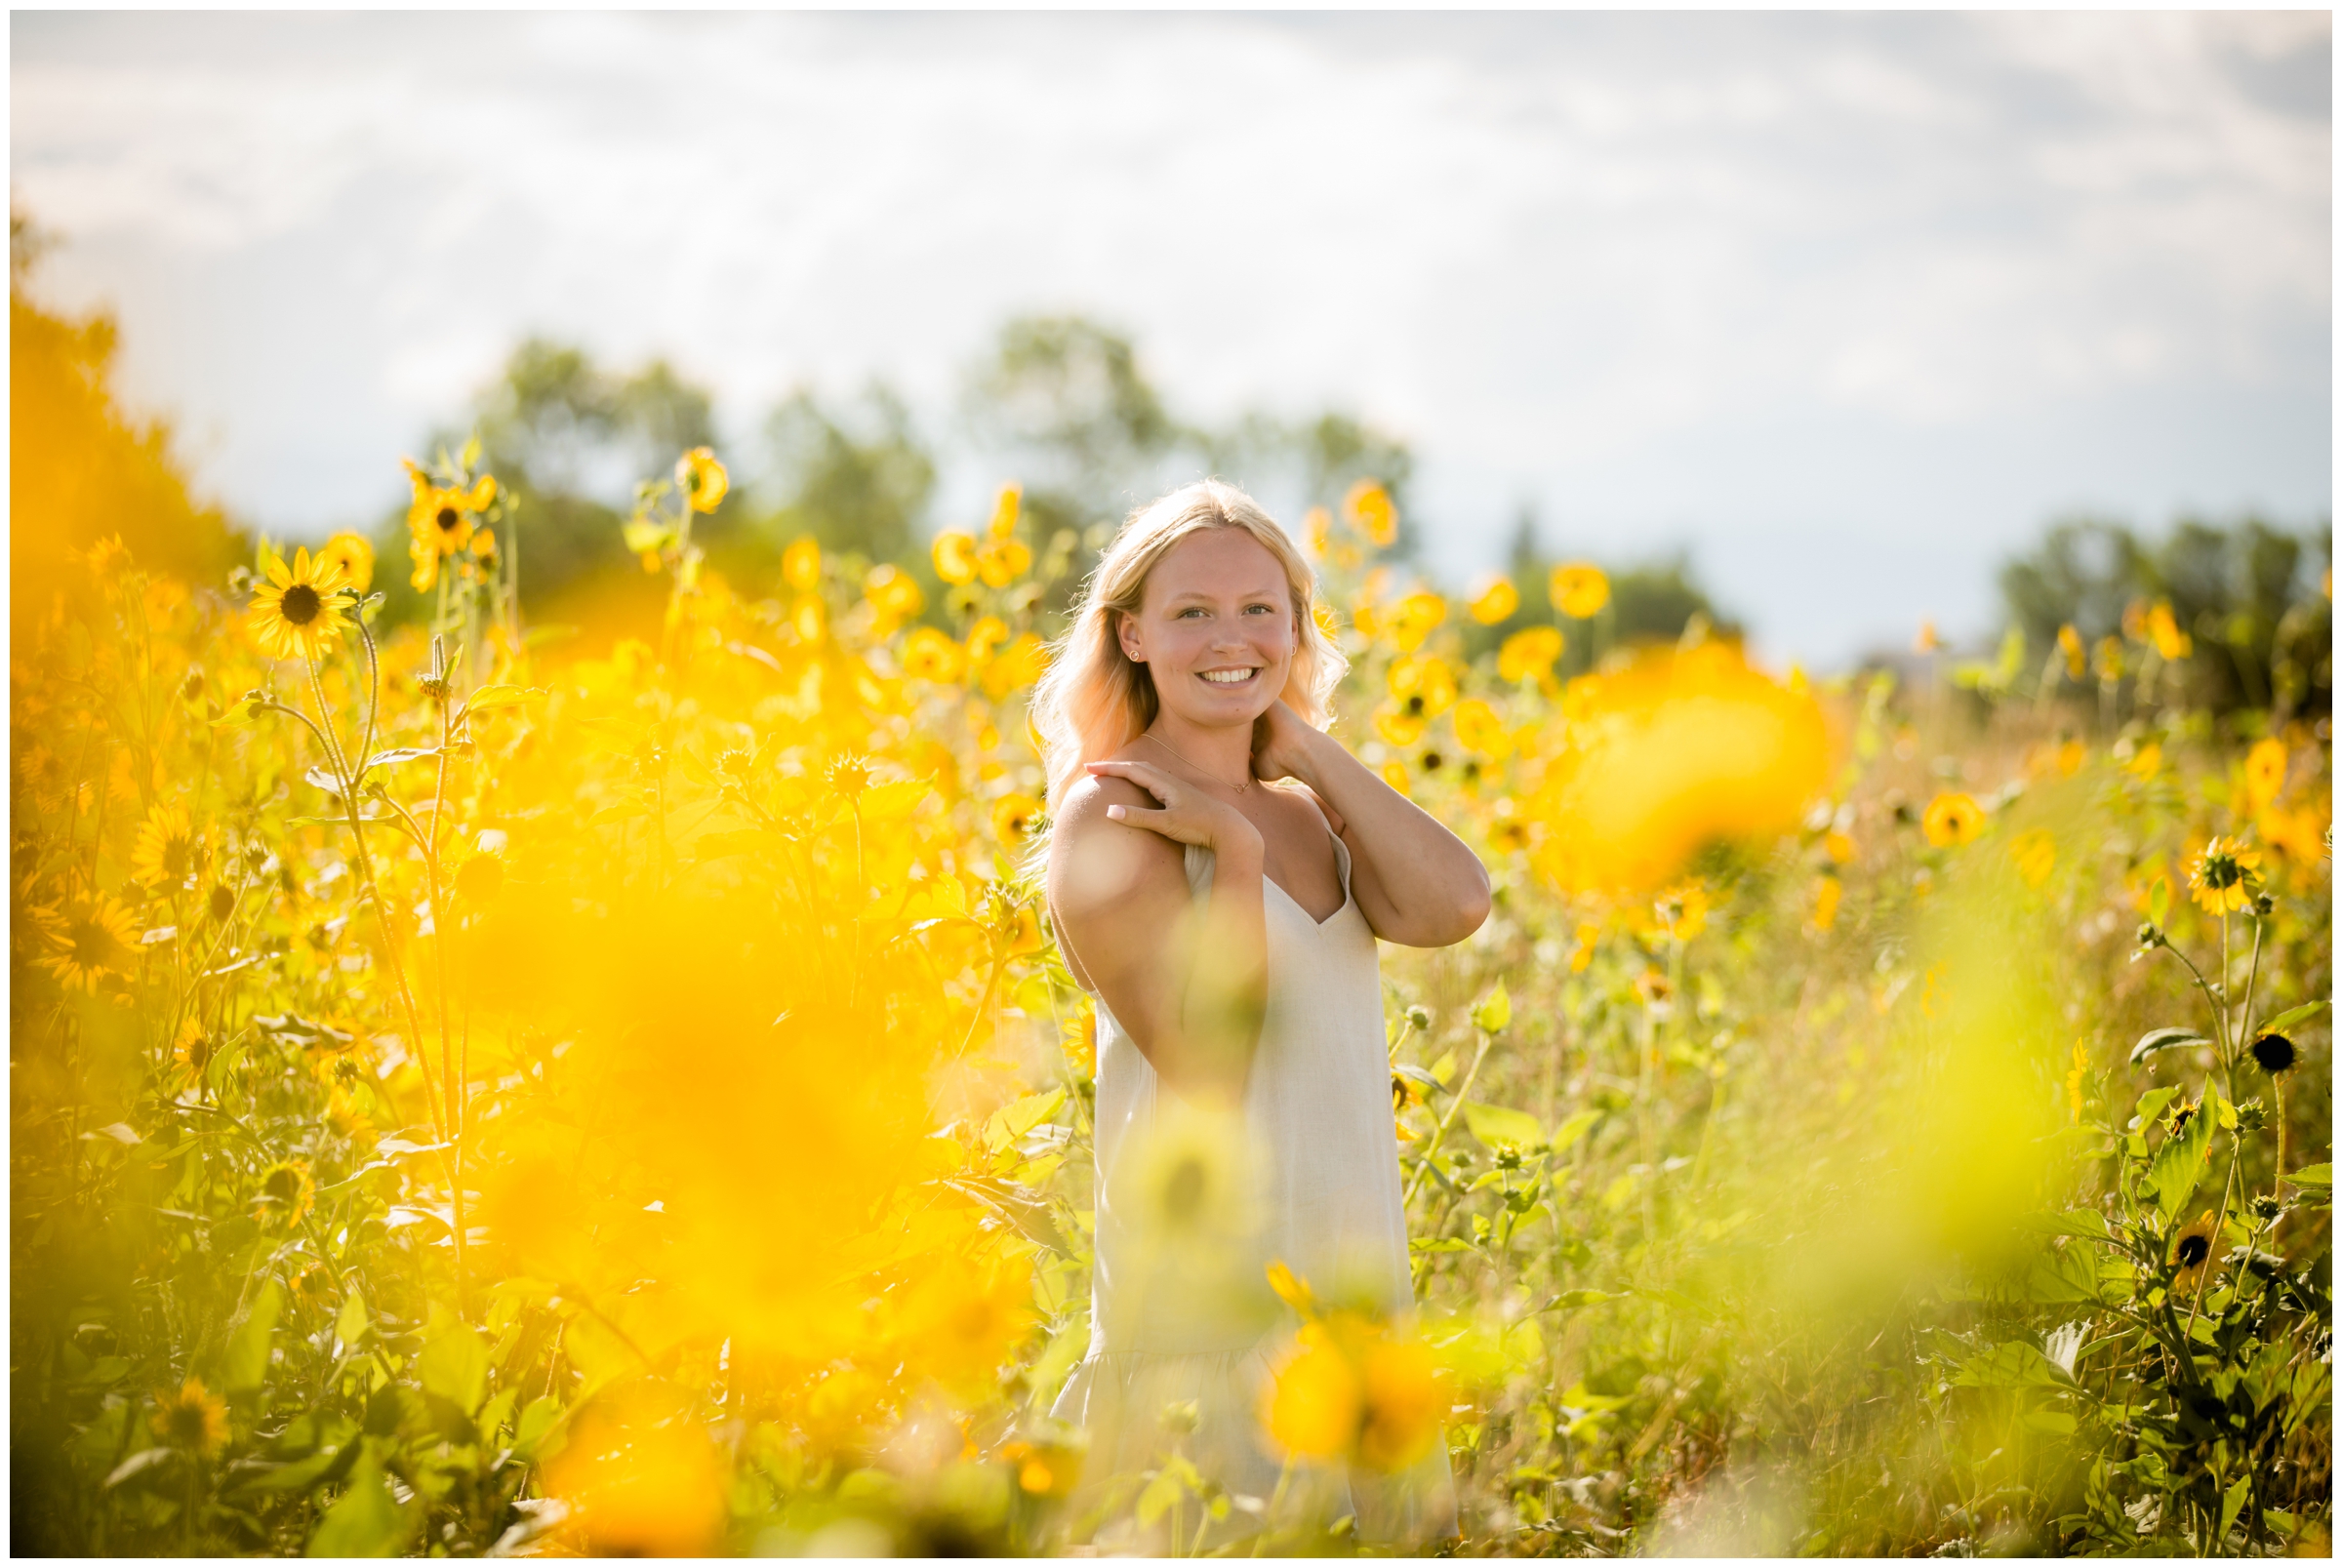 Erie senior portraits in a sunflower field by Northern Colorado photographer Plum Pretty Photography